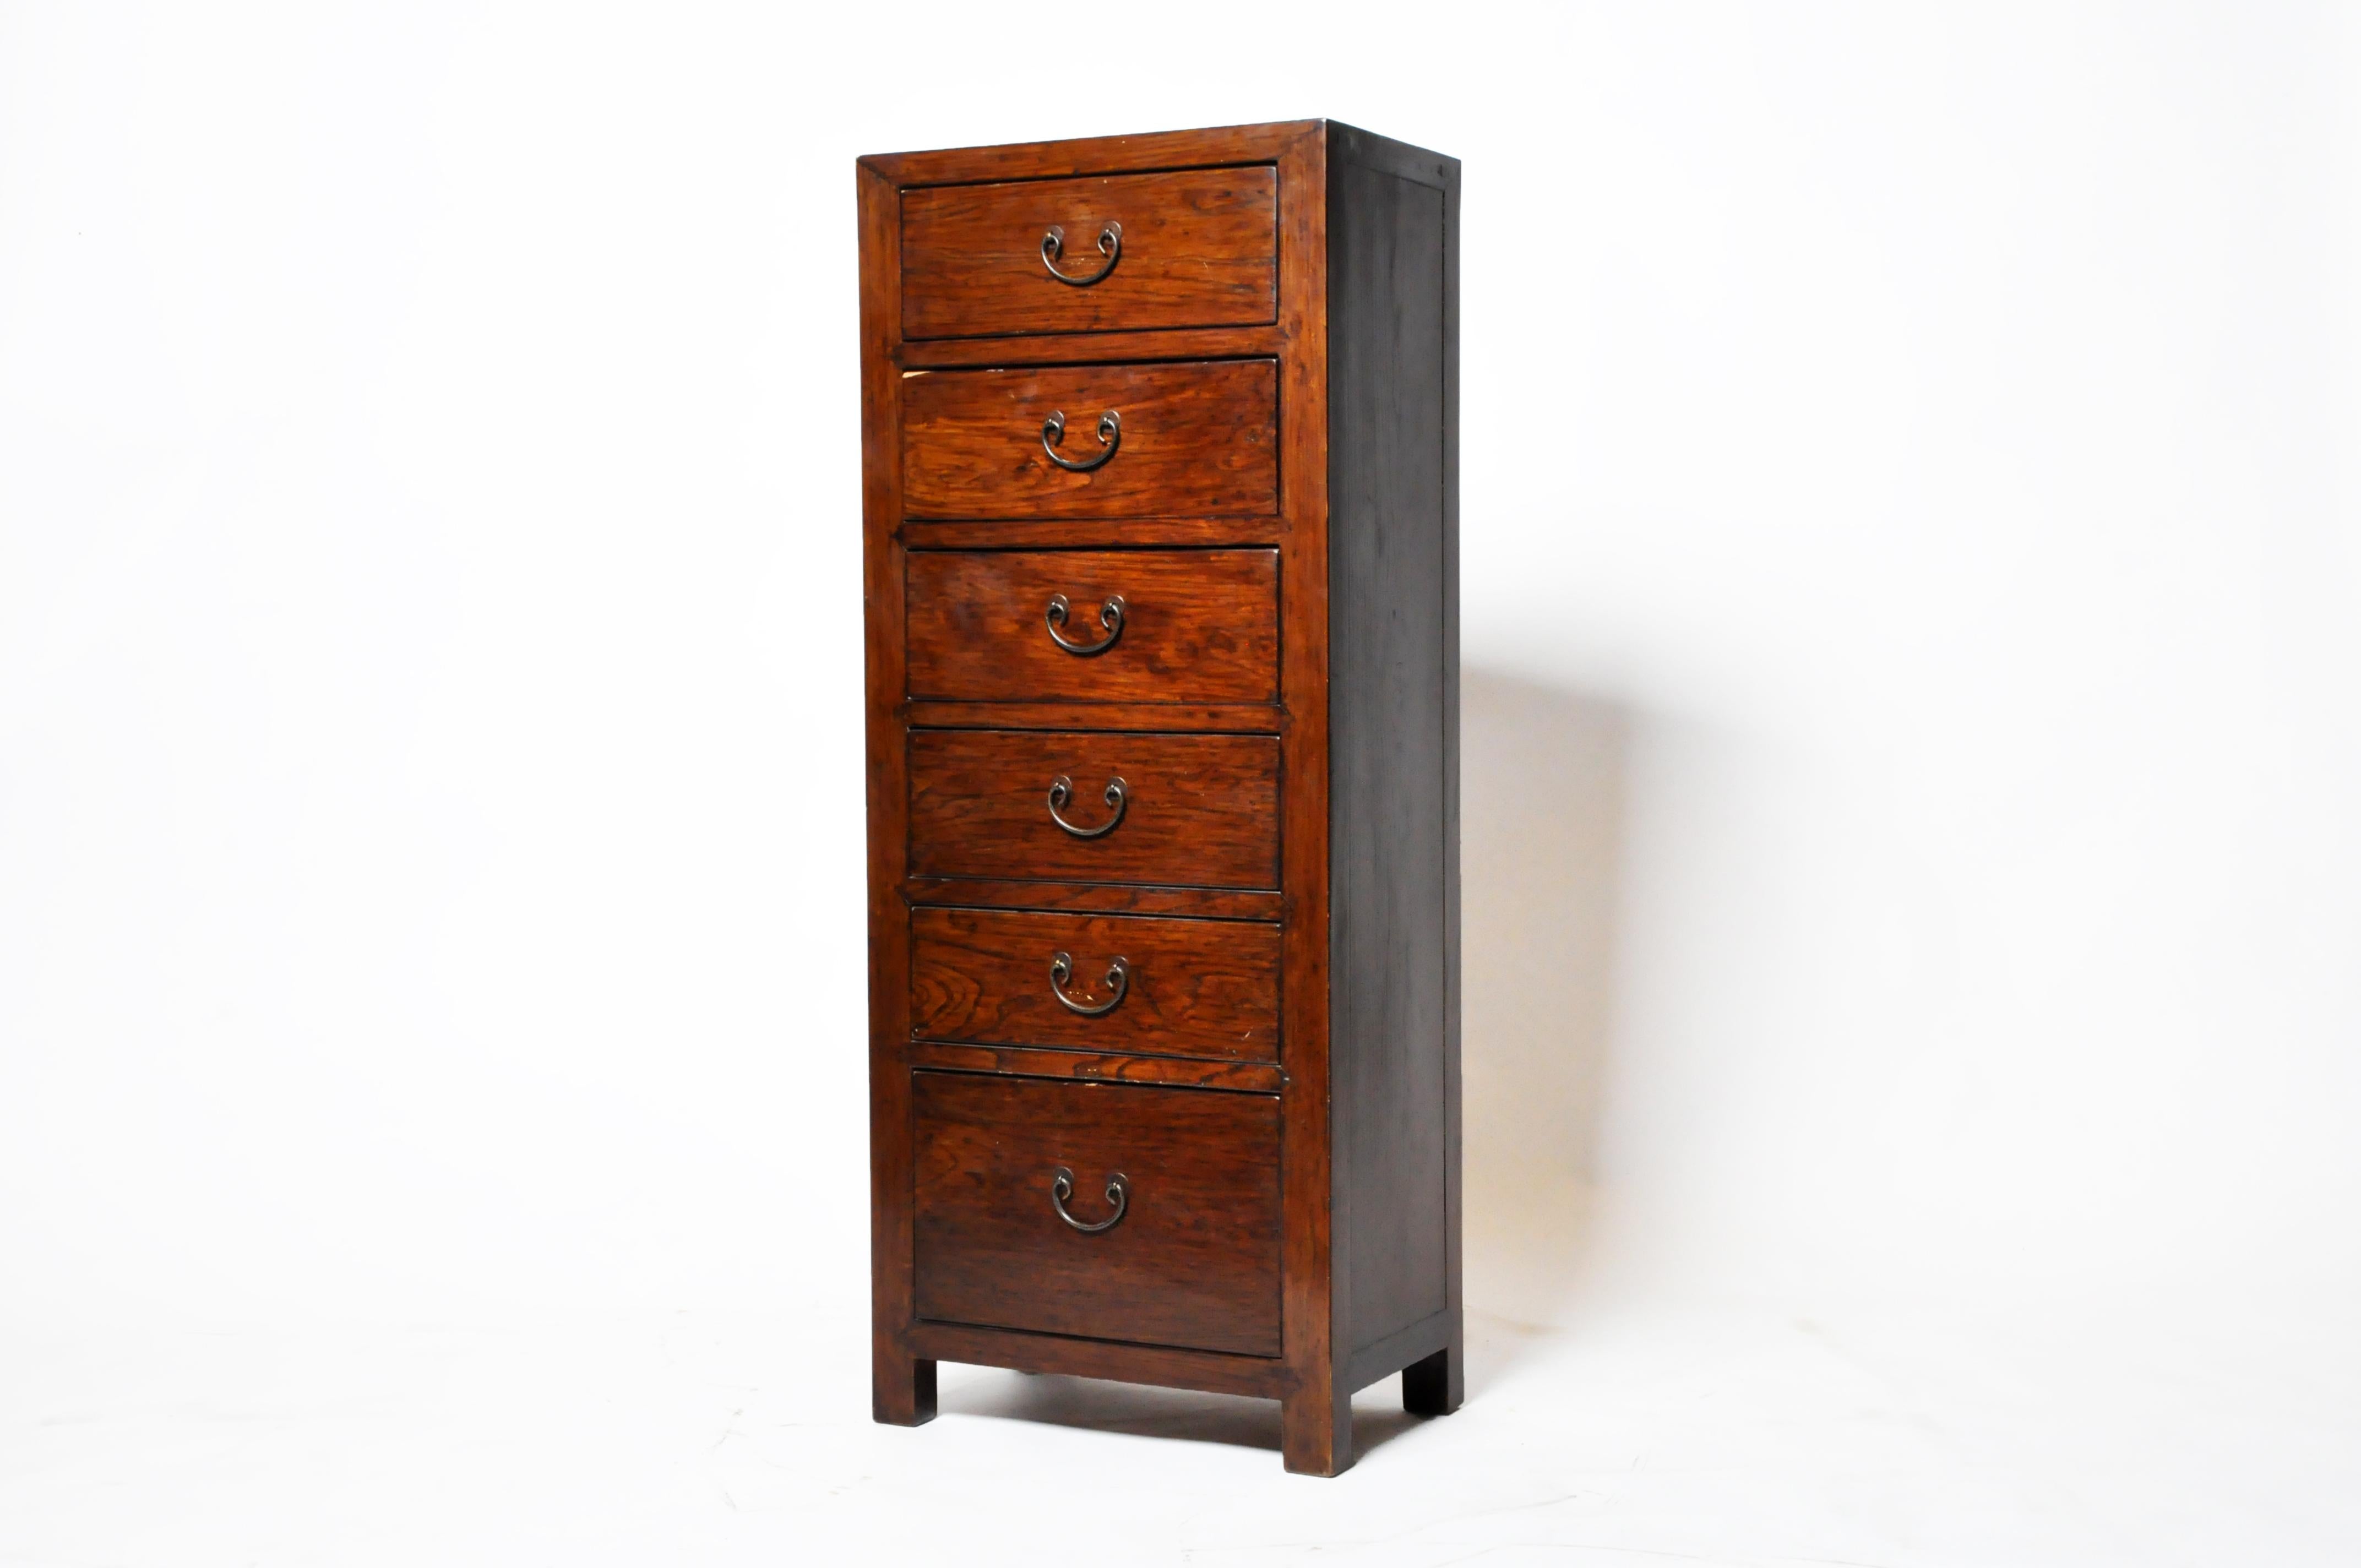 This modern chest of drawers was made from reclaimed elm wood joined in the classic Chinese manner, stained brown, and finished with French Polish (a shellac–based process usually reserved for European antiques). The rich color of the surface is